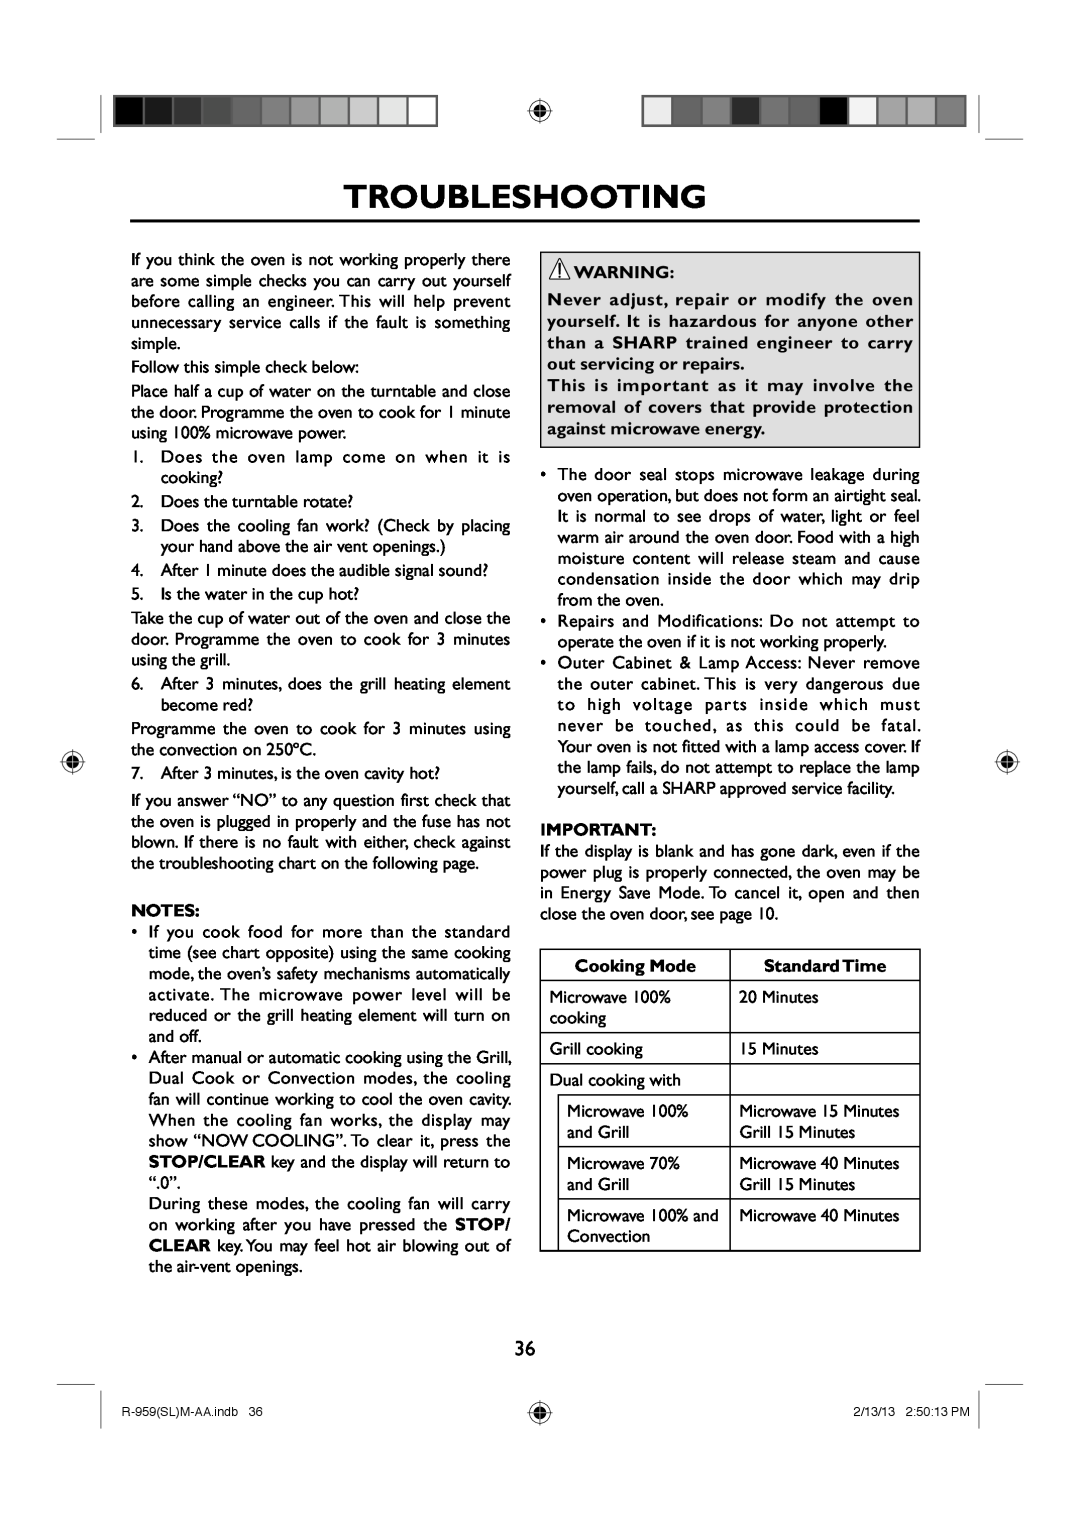 Sharp R-959(SL)M-AA manual Troubleshooting, Cooking Mode, Standard Time 